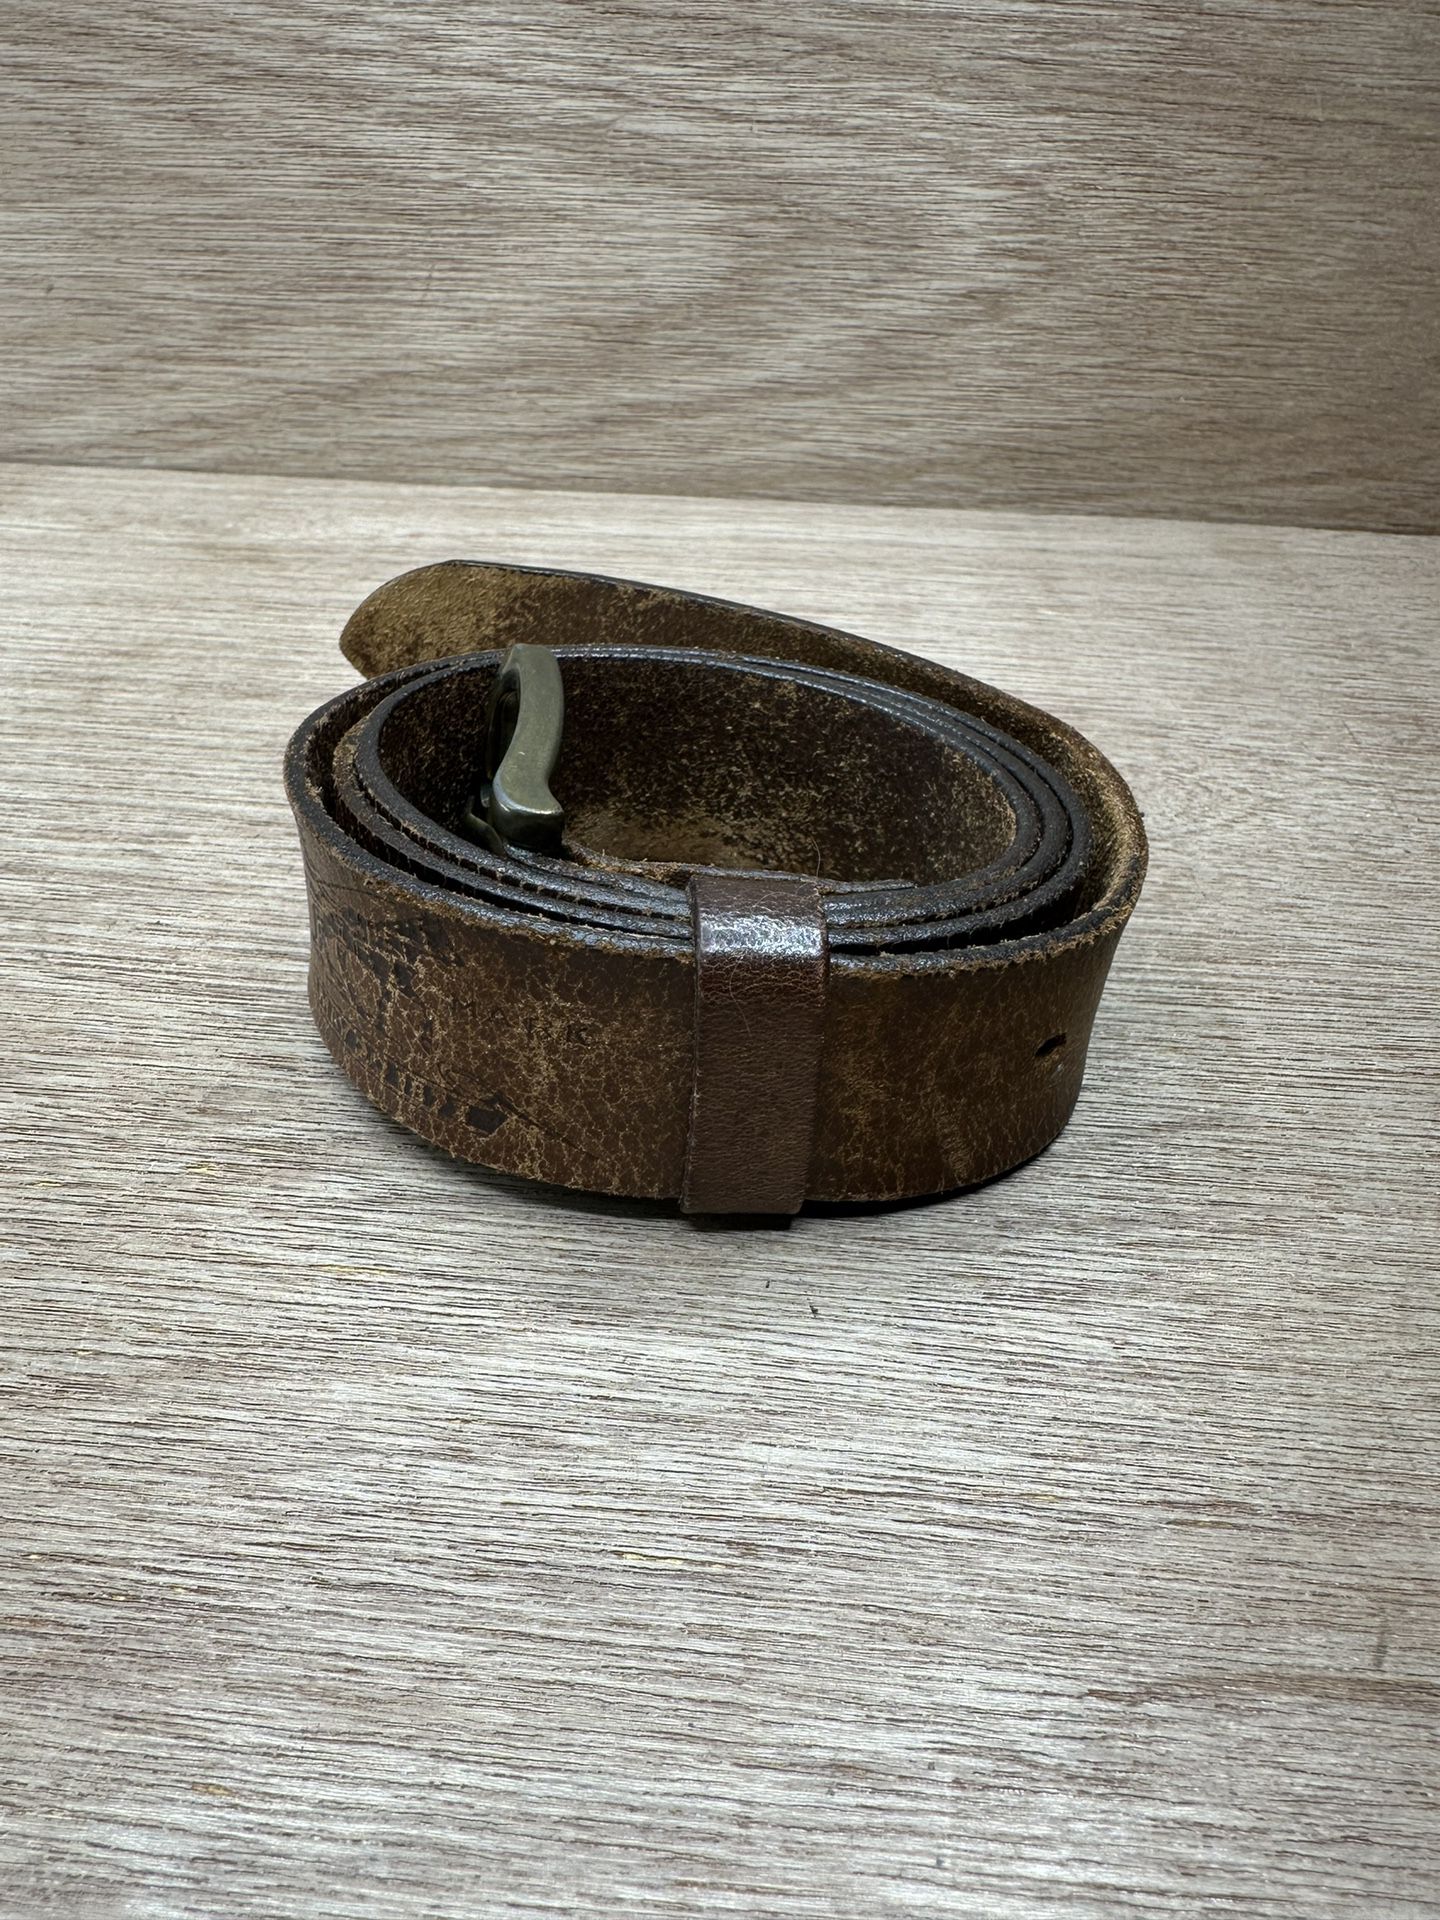 Levi's Full Grain Leather 95 / 38 Belt Made in Italy